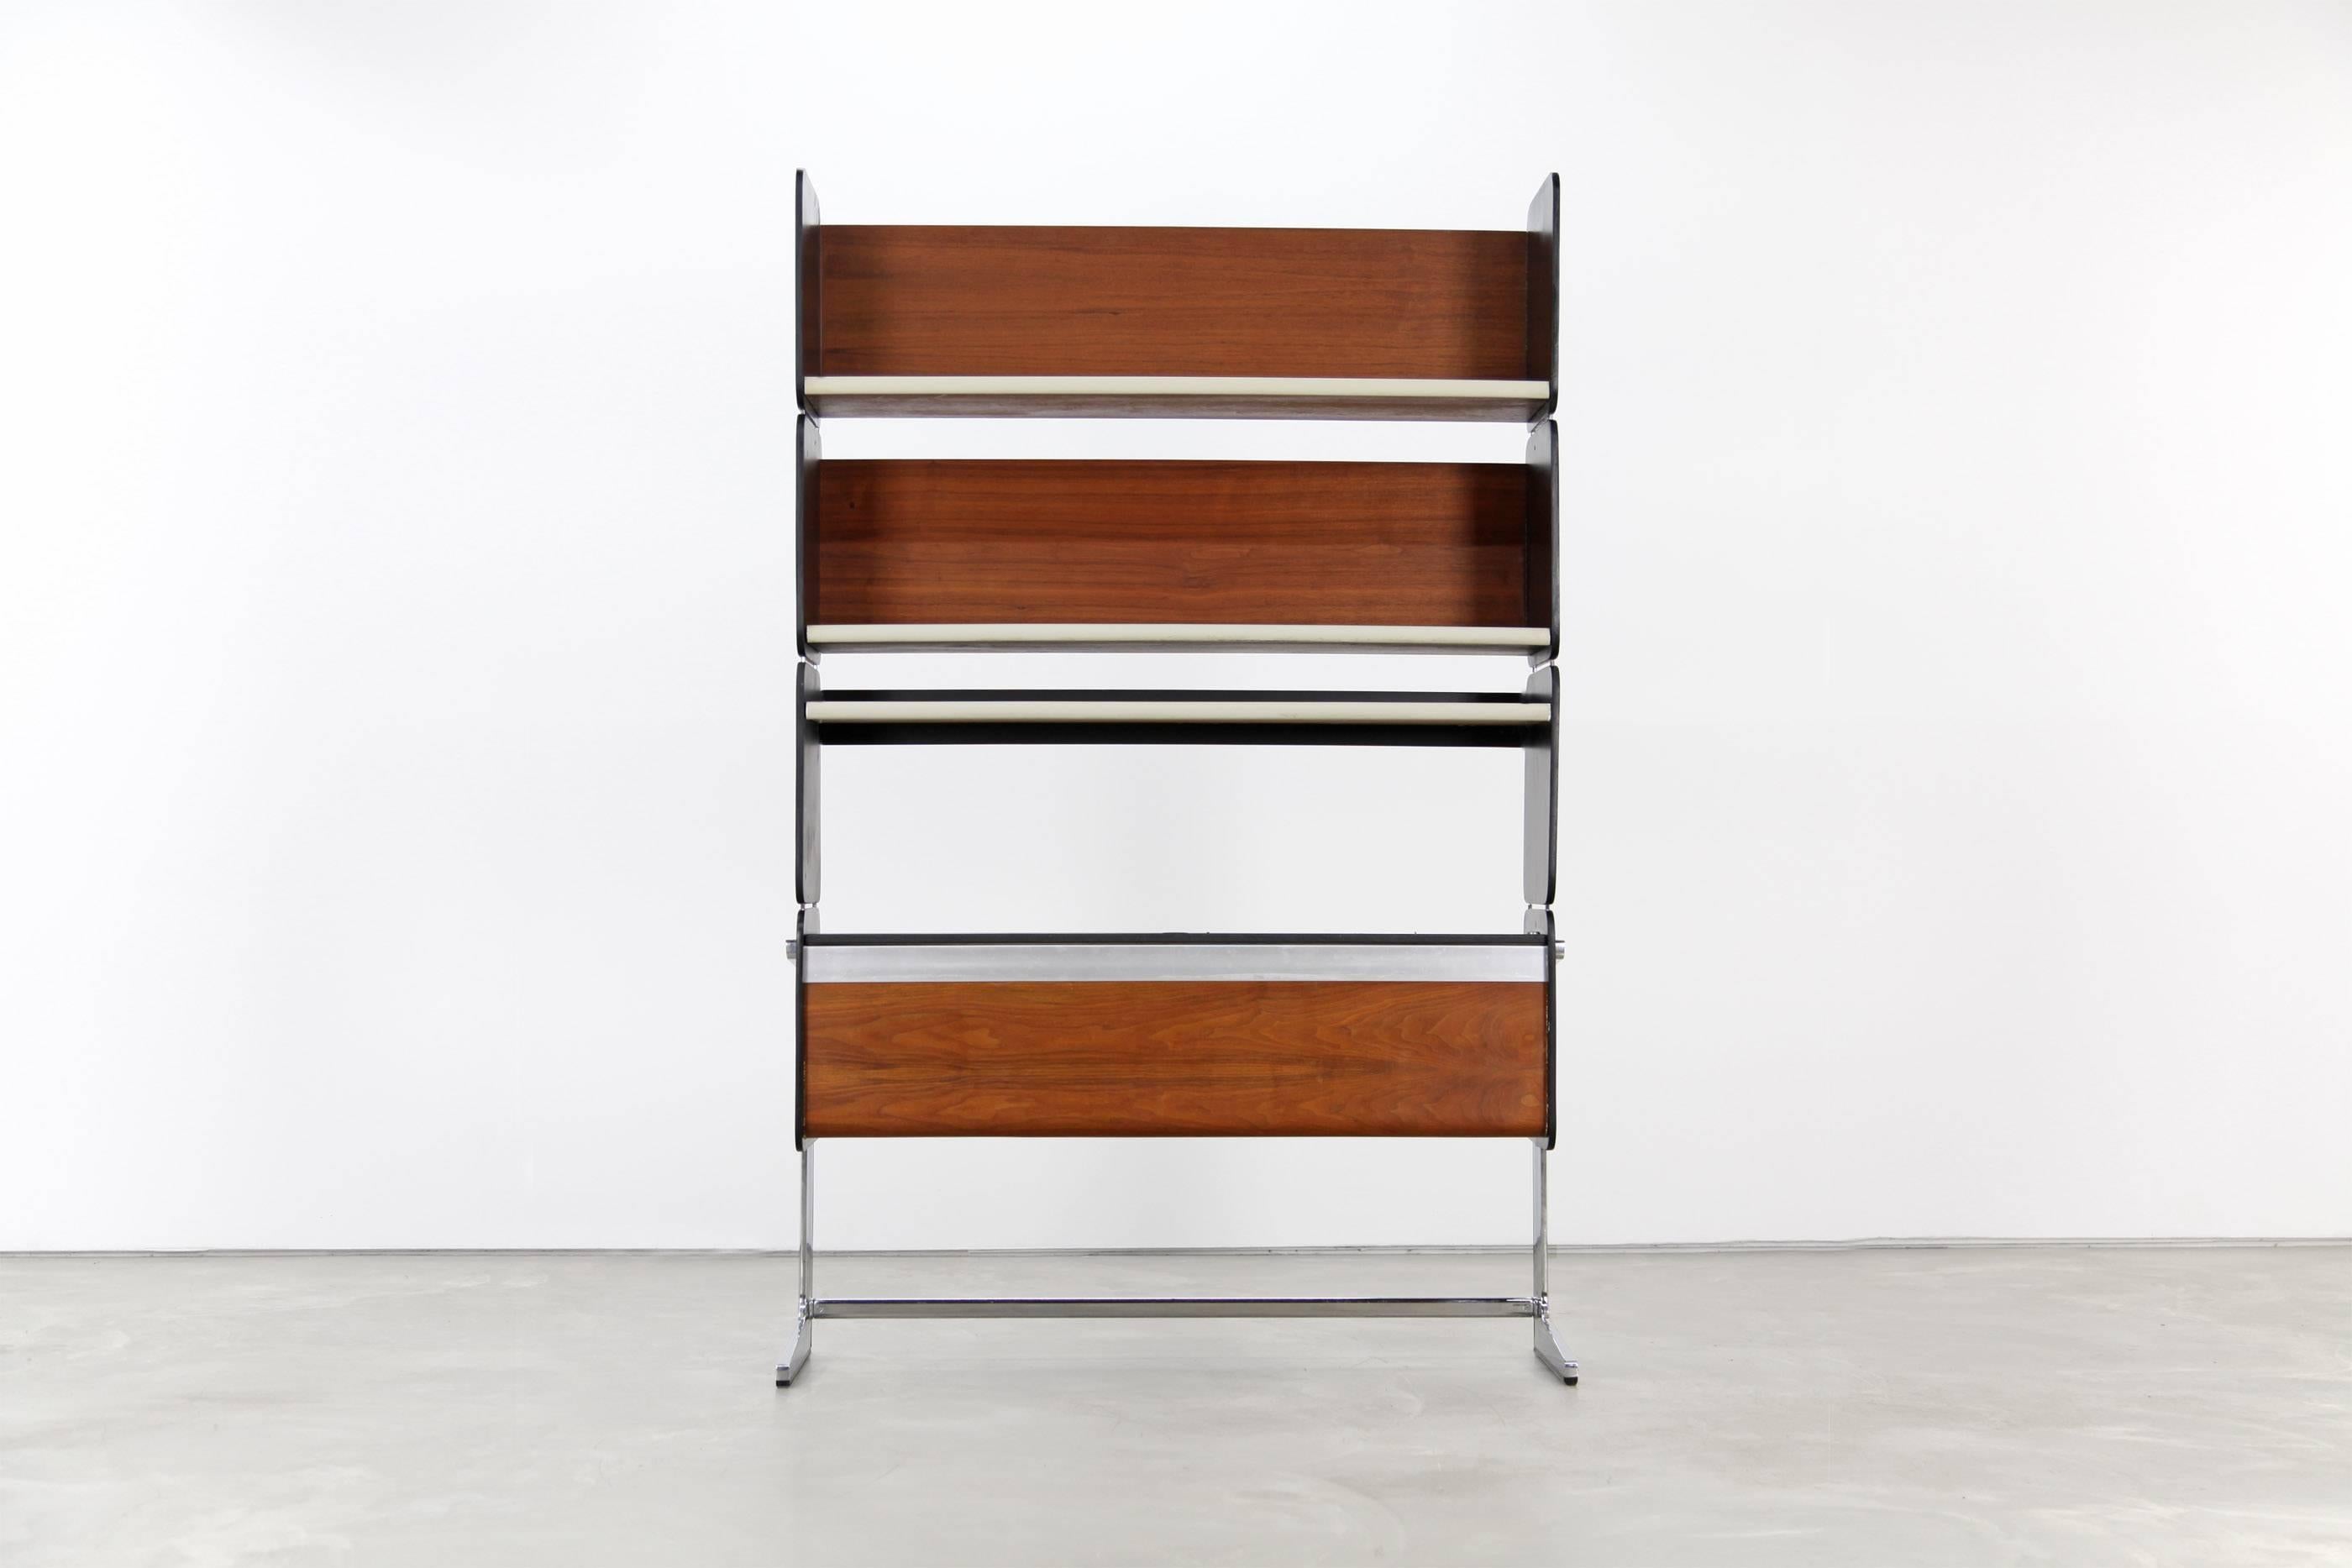 Shelving unit designed by George Nelson. Manufactured Herman Miller in the 1960s.
 